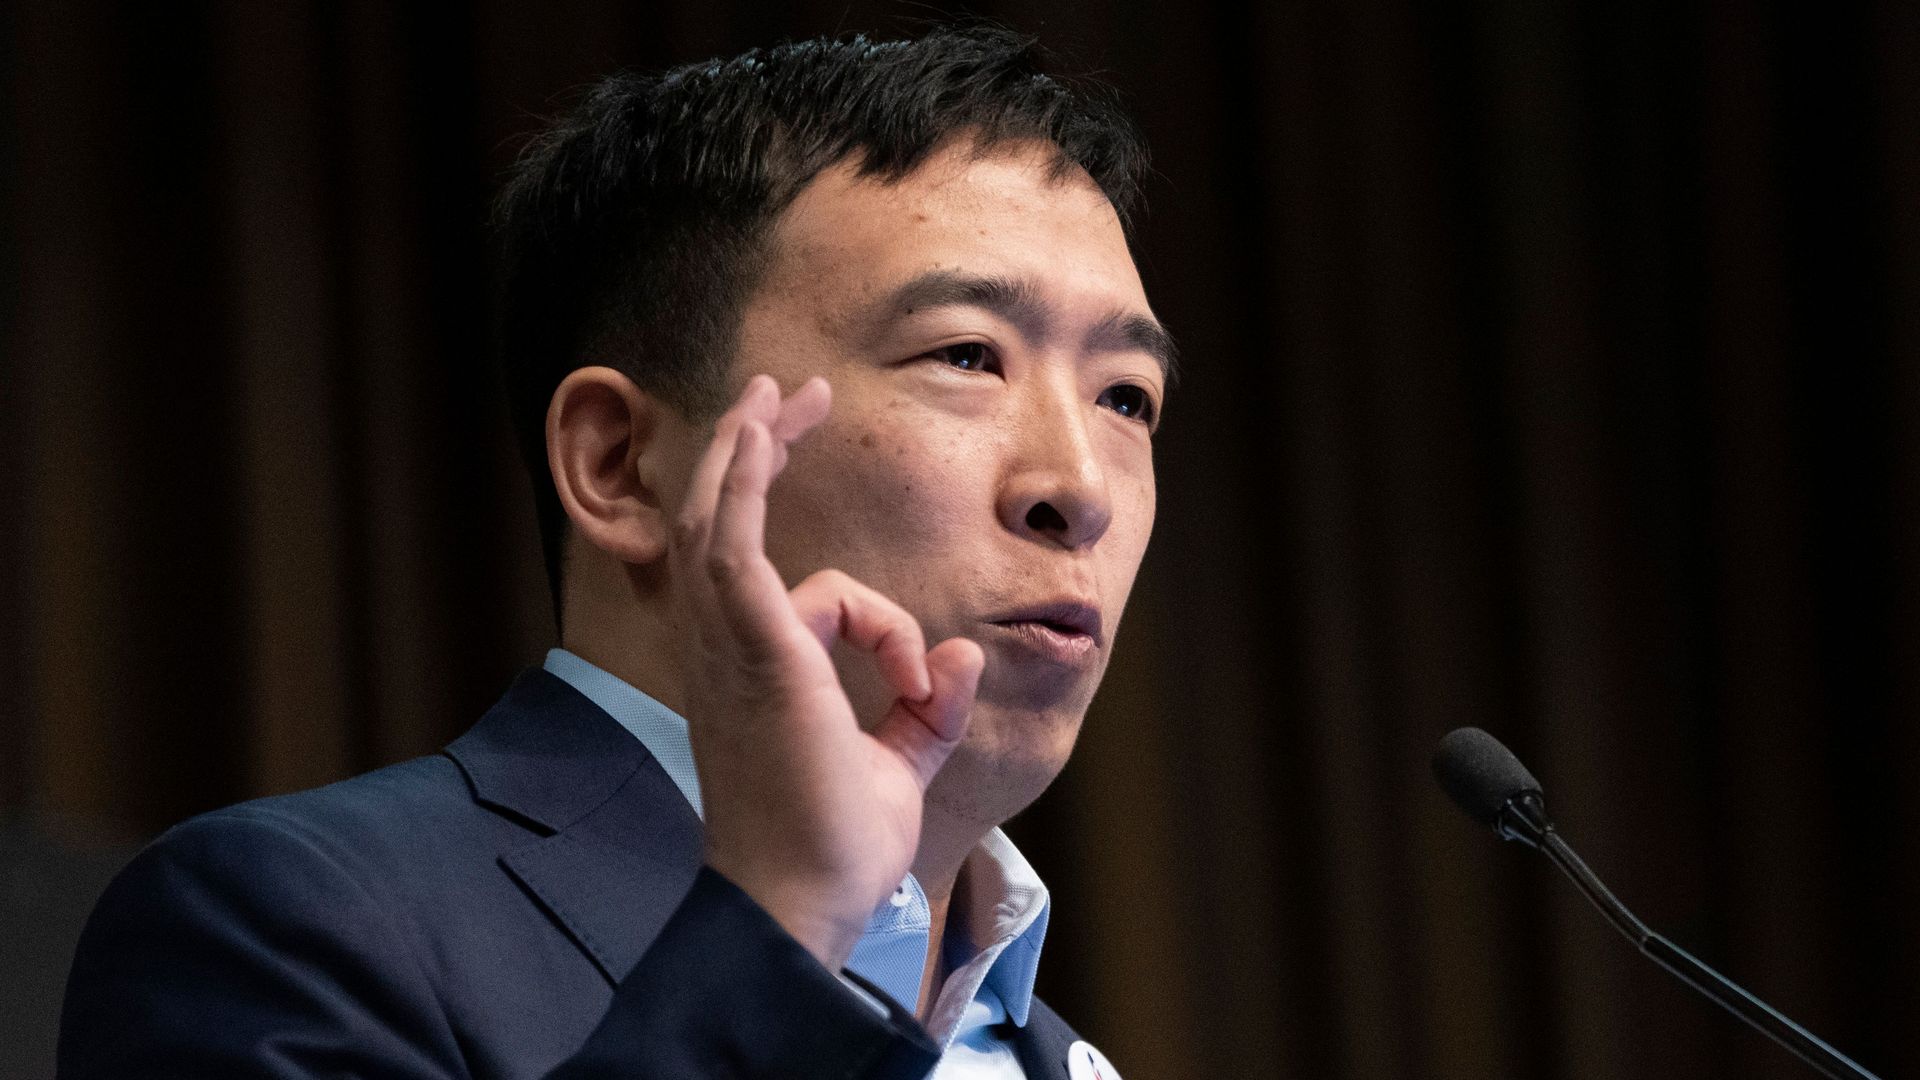 Democratic 2020 hopeful Andrew Yang proposes giving every American adult a $1000 a month "freedom dividend."